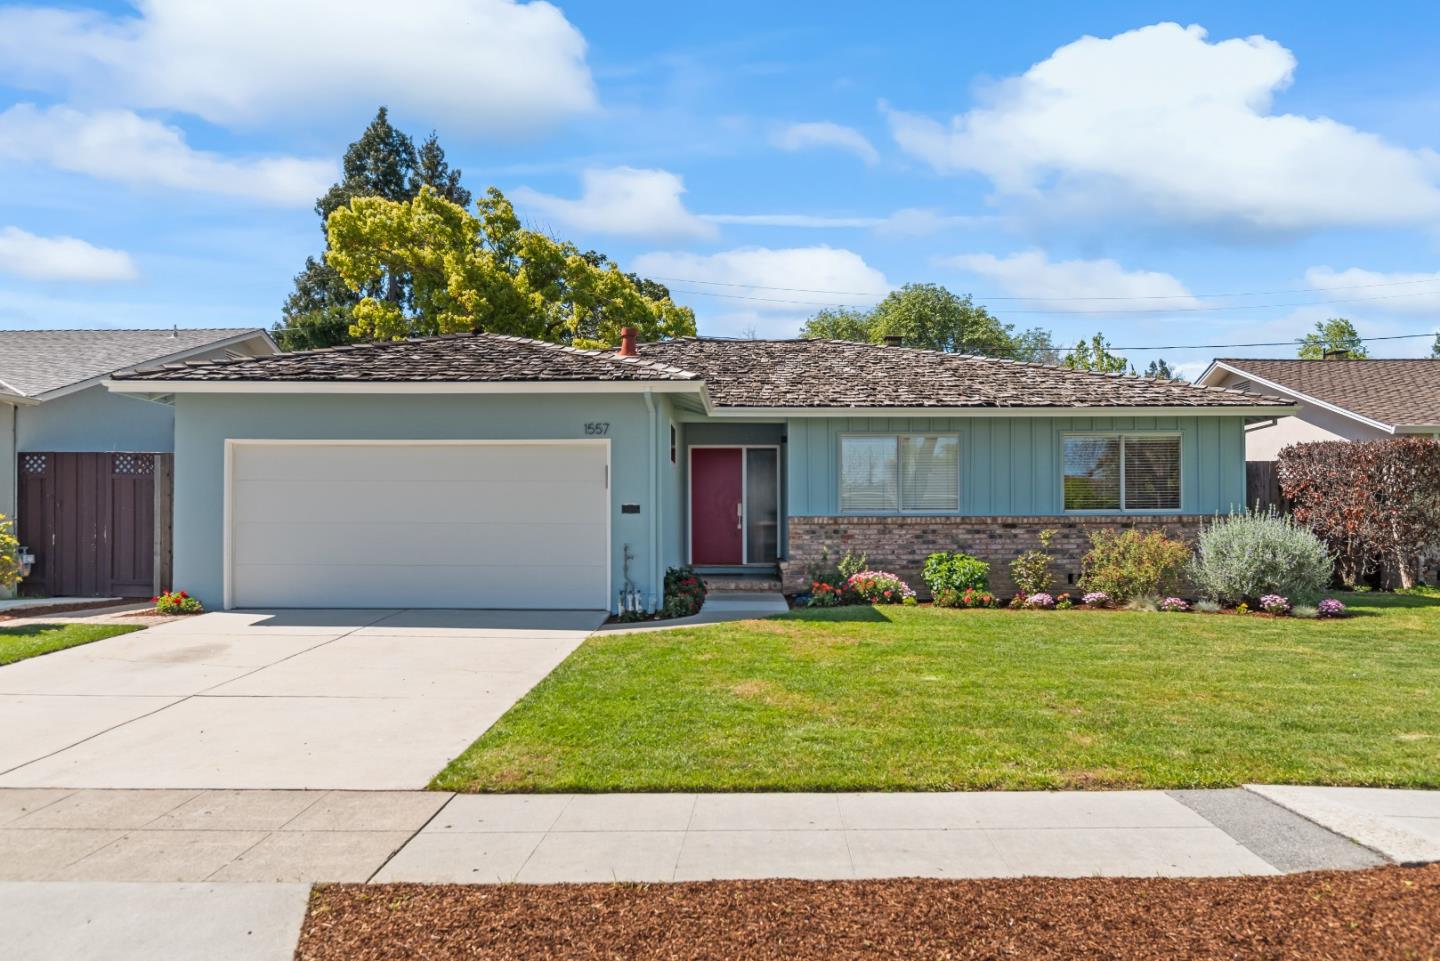 Detail Gallery Image 1 of 1 For 1557 Waxwing Ave, Sunnyvale,  CA 94087 - 3 Beds | 2 Baths